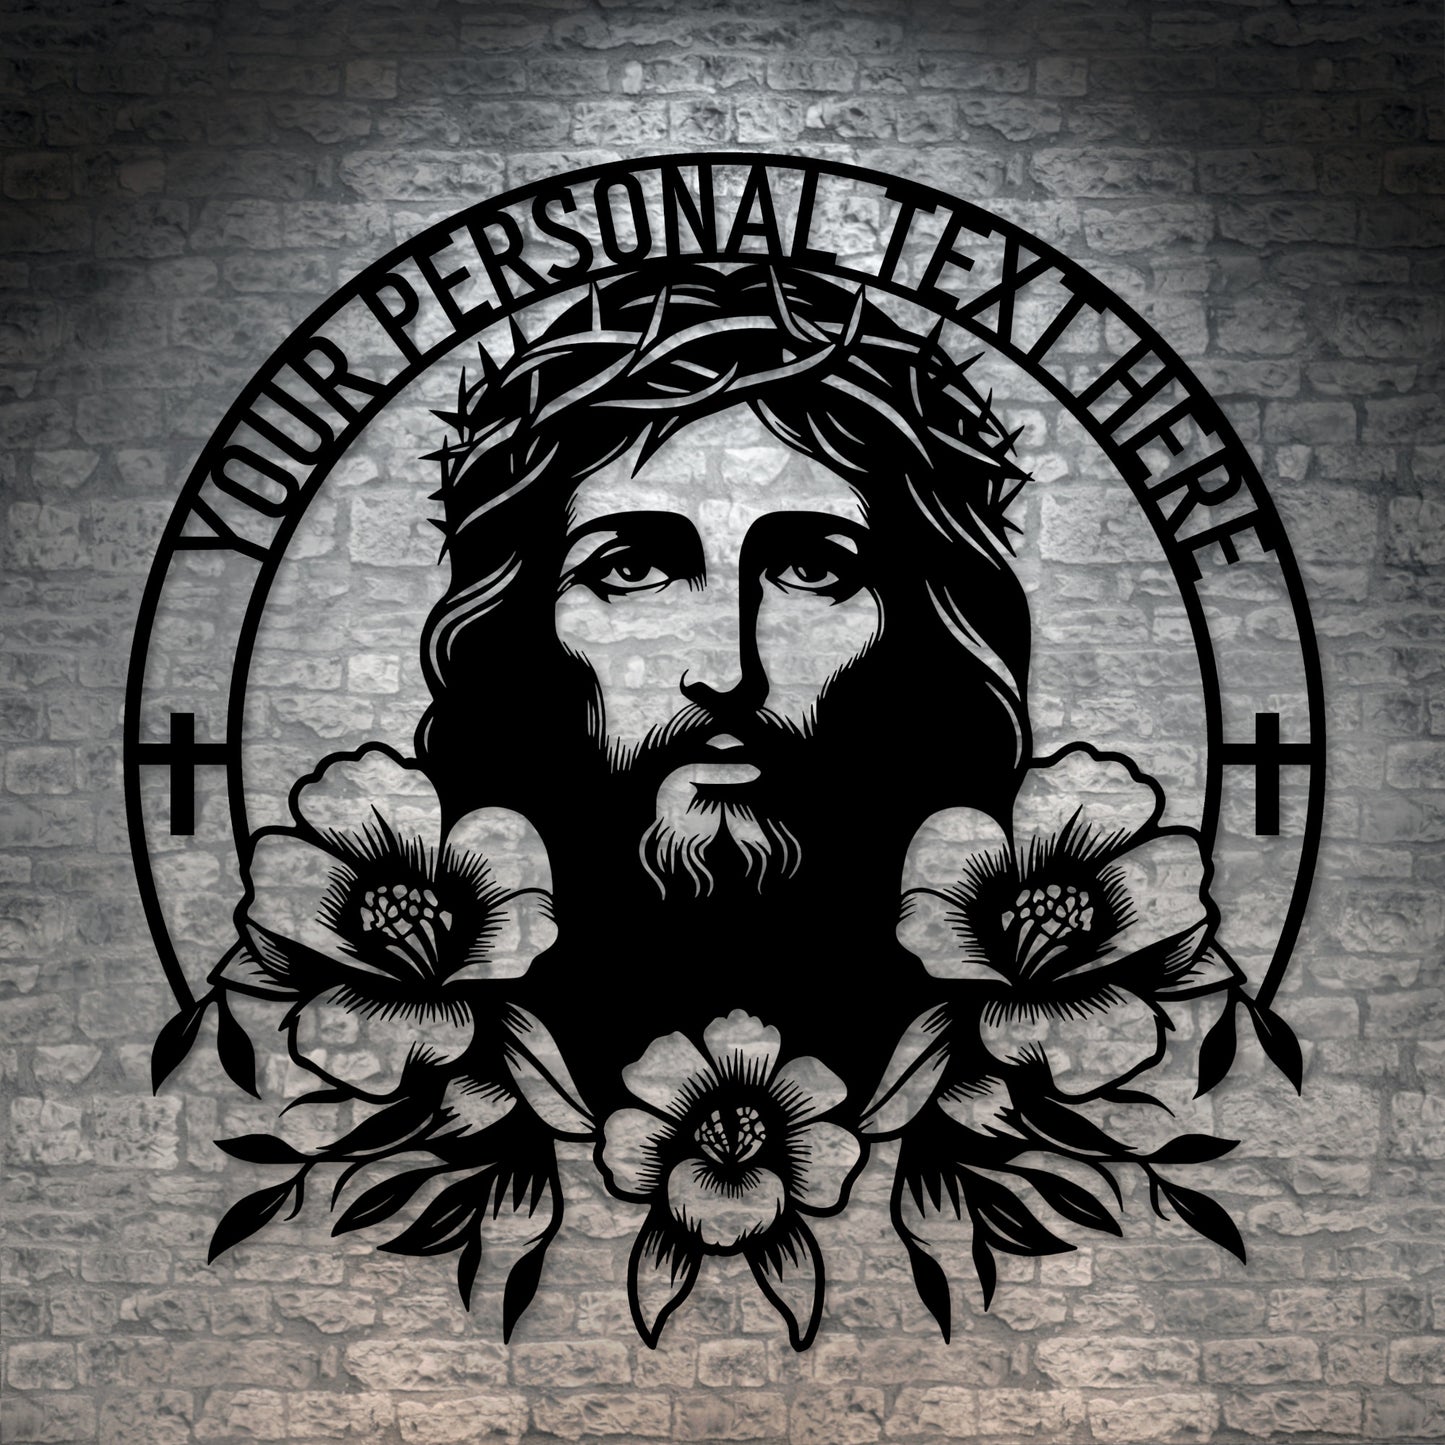 Personalized Jesus Metal Art sign. Custom Christian Wall Decor Gift. Religious Wall Hanging. Unique Floral Faith Decoration. Spiritual Decor